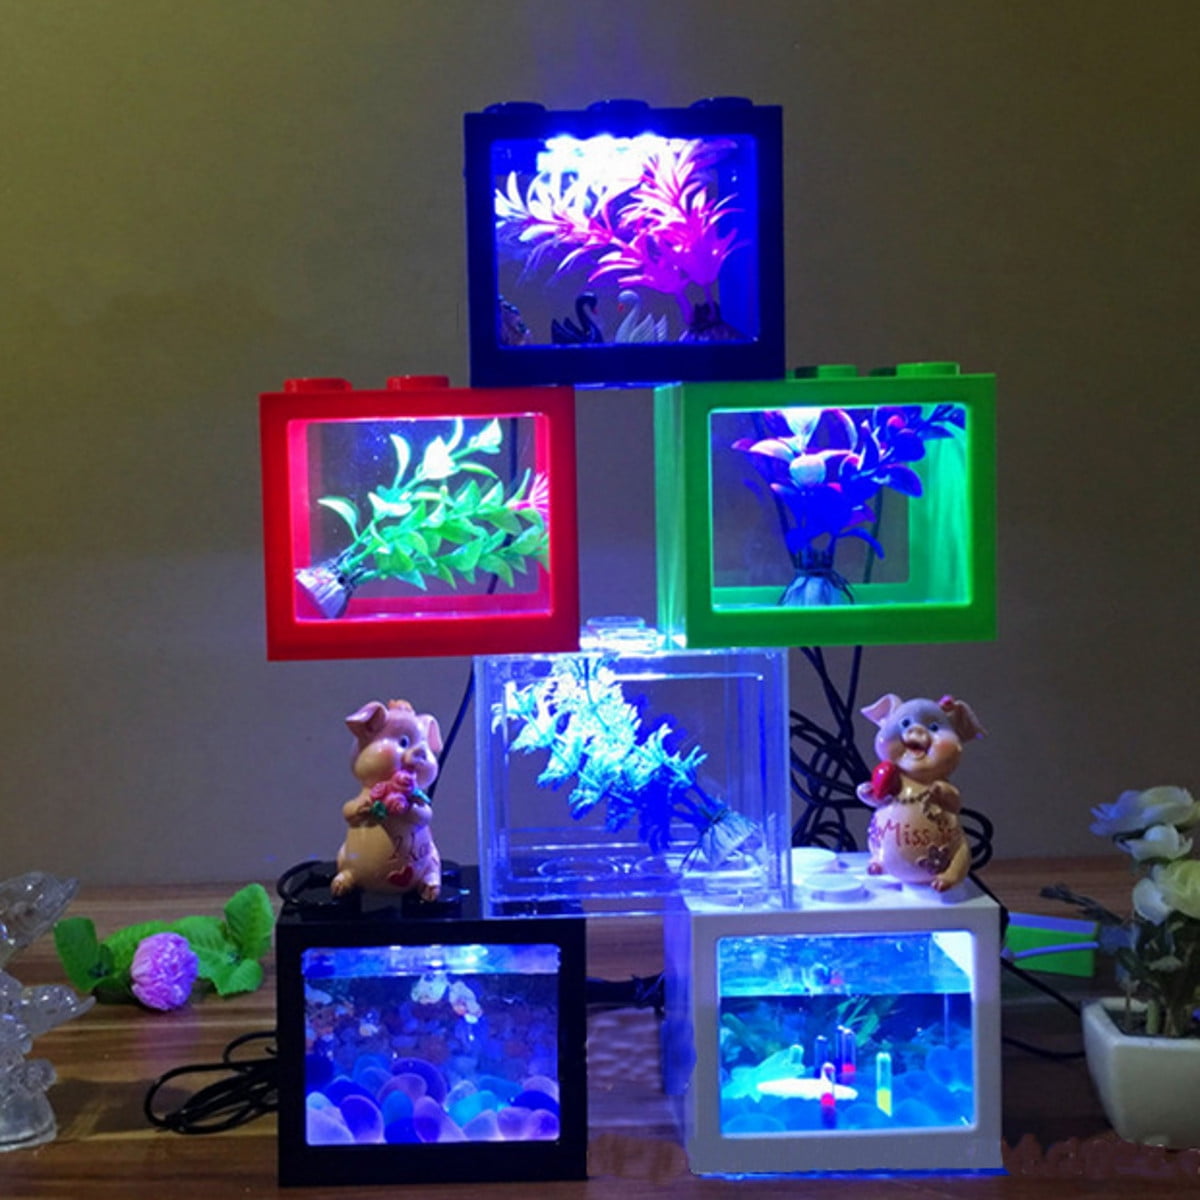 Small Betta Fish Tank,Fish Bow Aquarium with Gravel Plants Rocks Feeder,Small Fish Tank for Turtle Reptile Jellyfish Goldfish Shrimp Moss Balls Insects,Table Decoration Box for Kids Room Office，Home